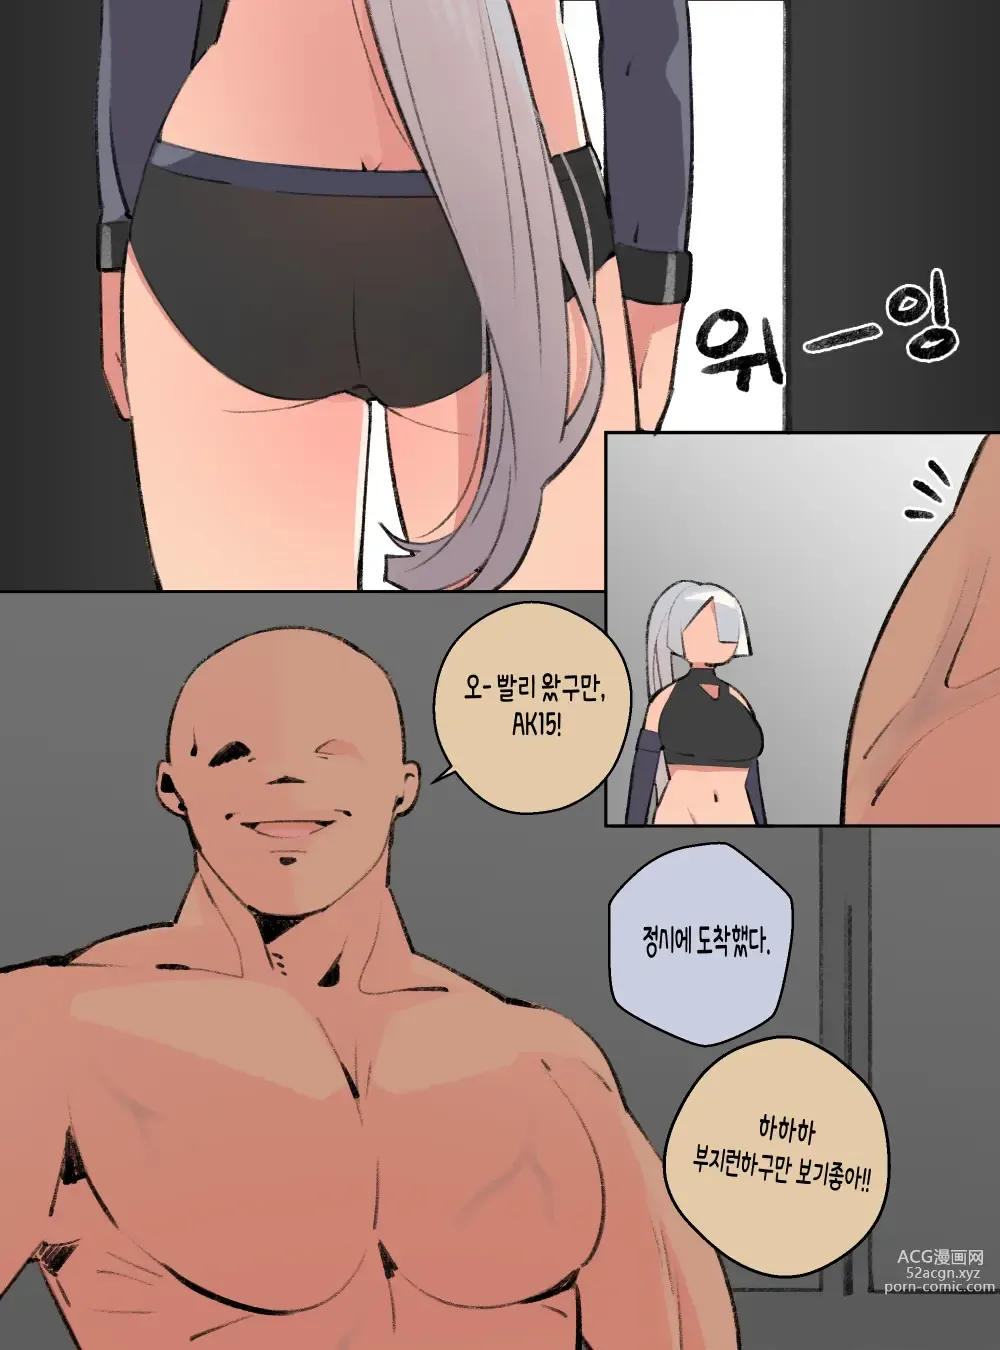 Page 4 of doujinshi Lets exercise with AK15!